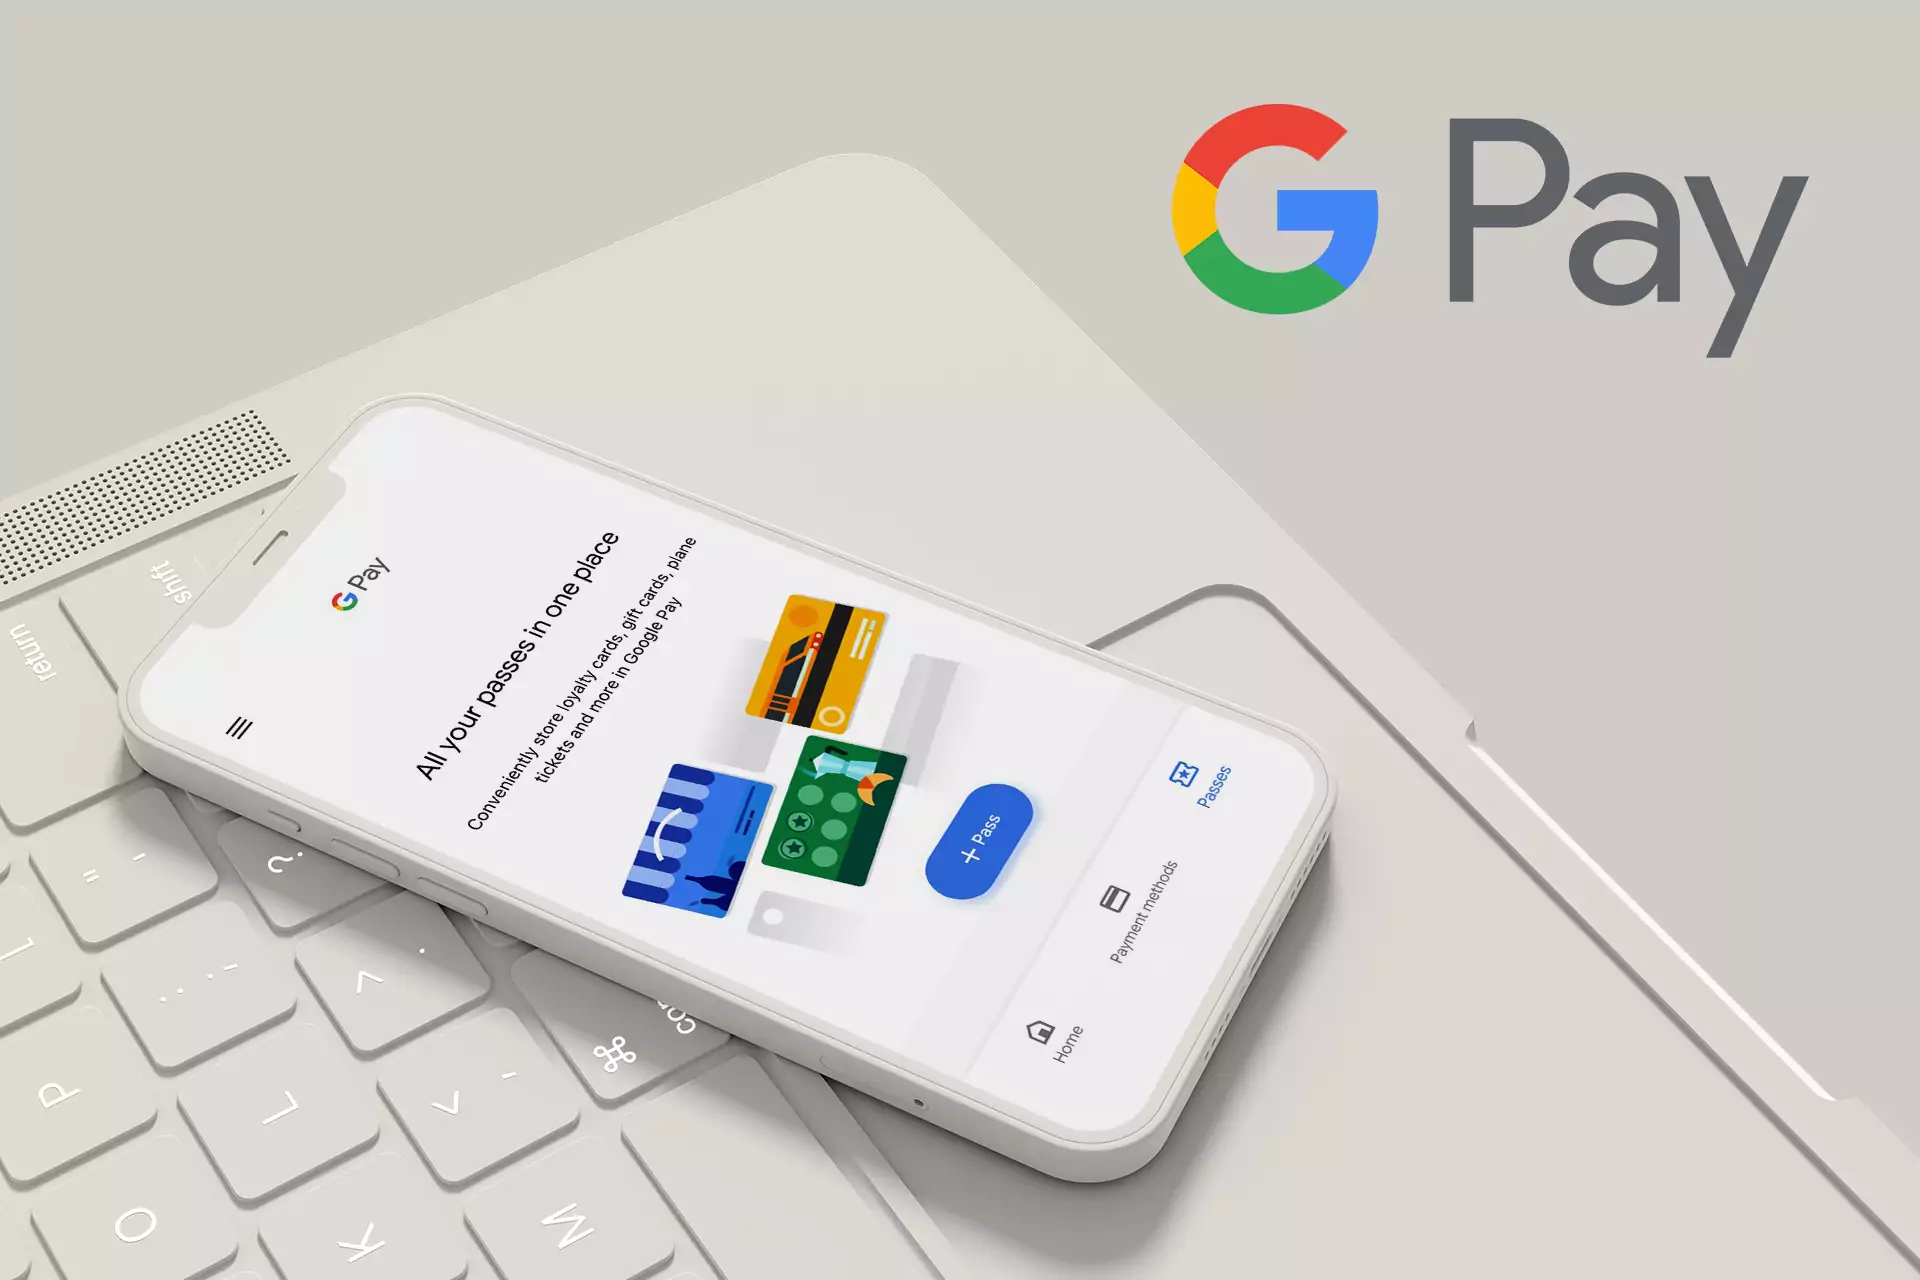 You don't risk your money using Google Pay.